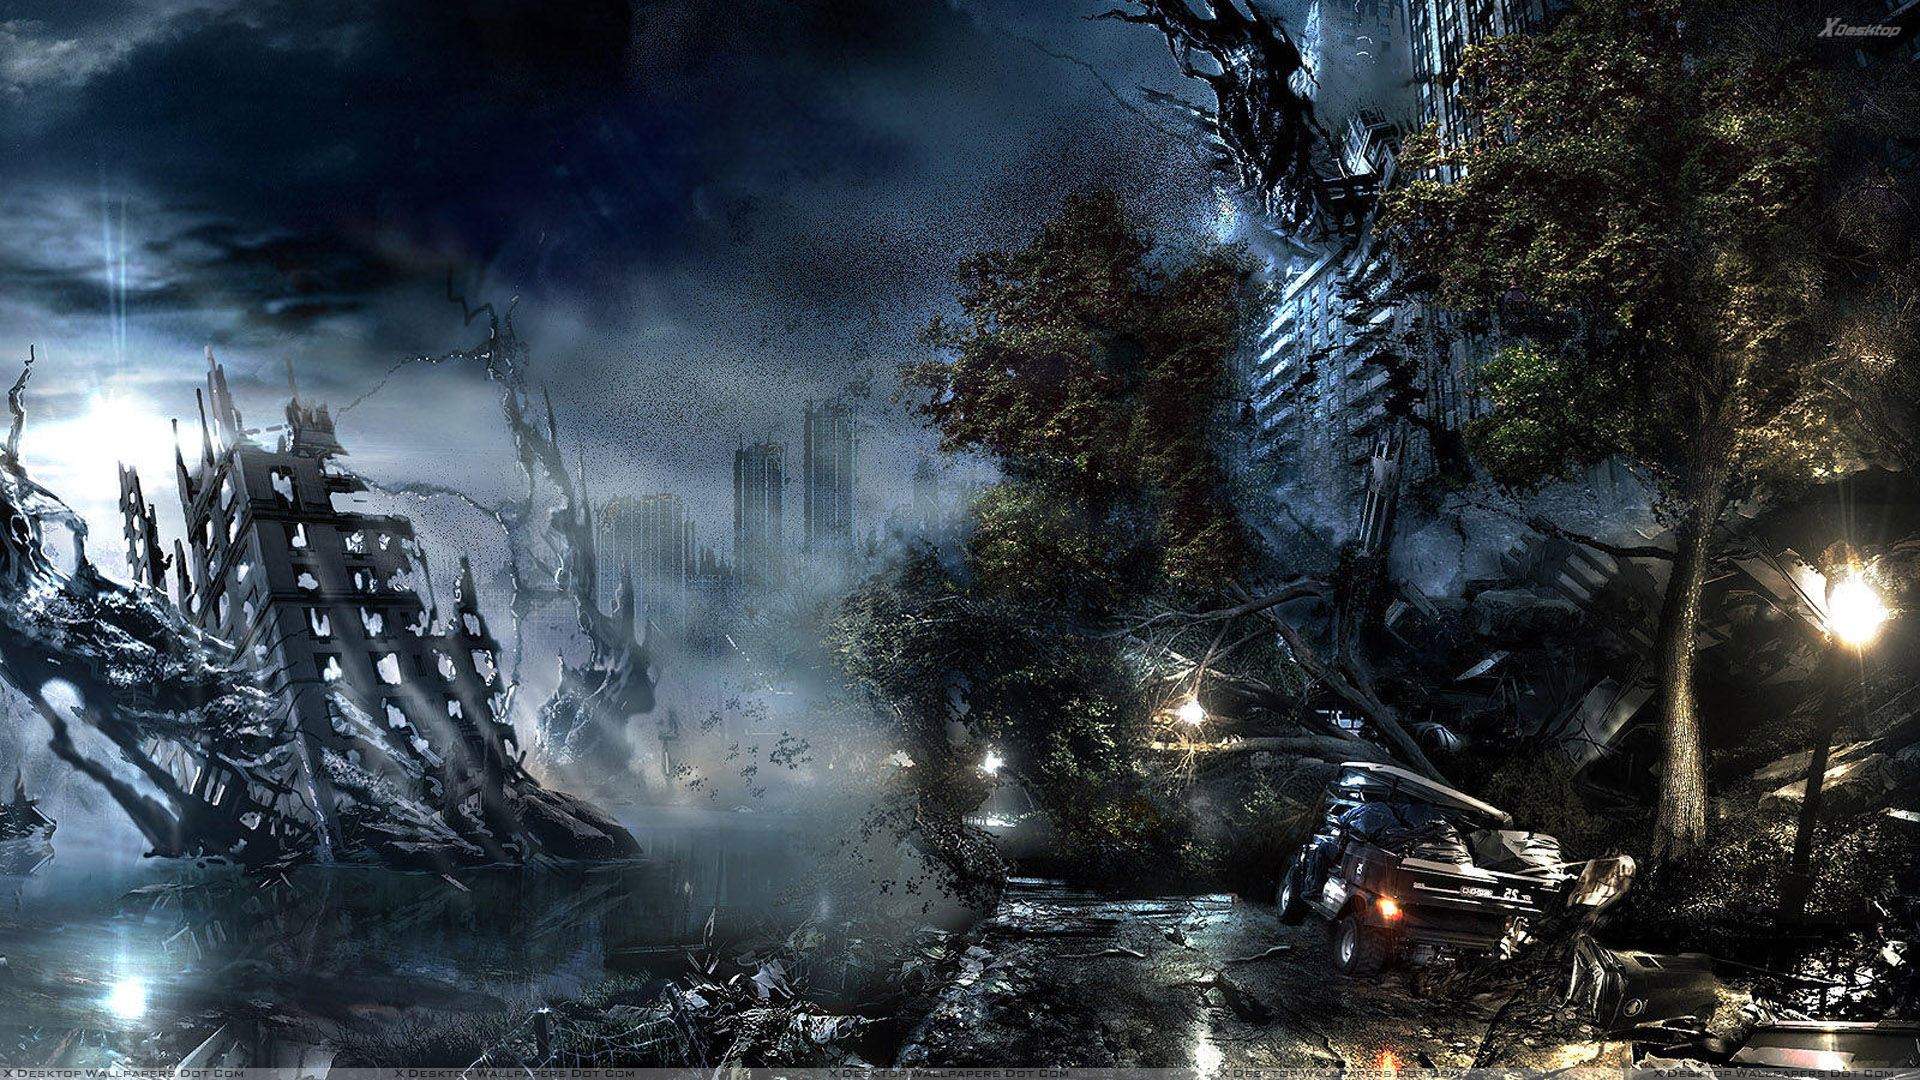 Future City Wallpaper Destroyed Of From Dark HD Walls